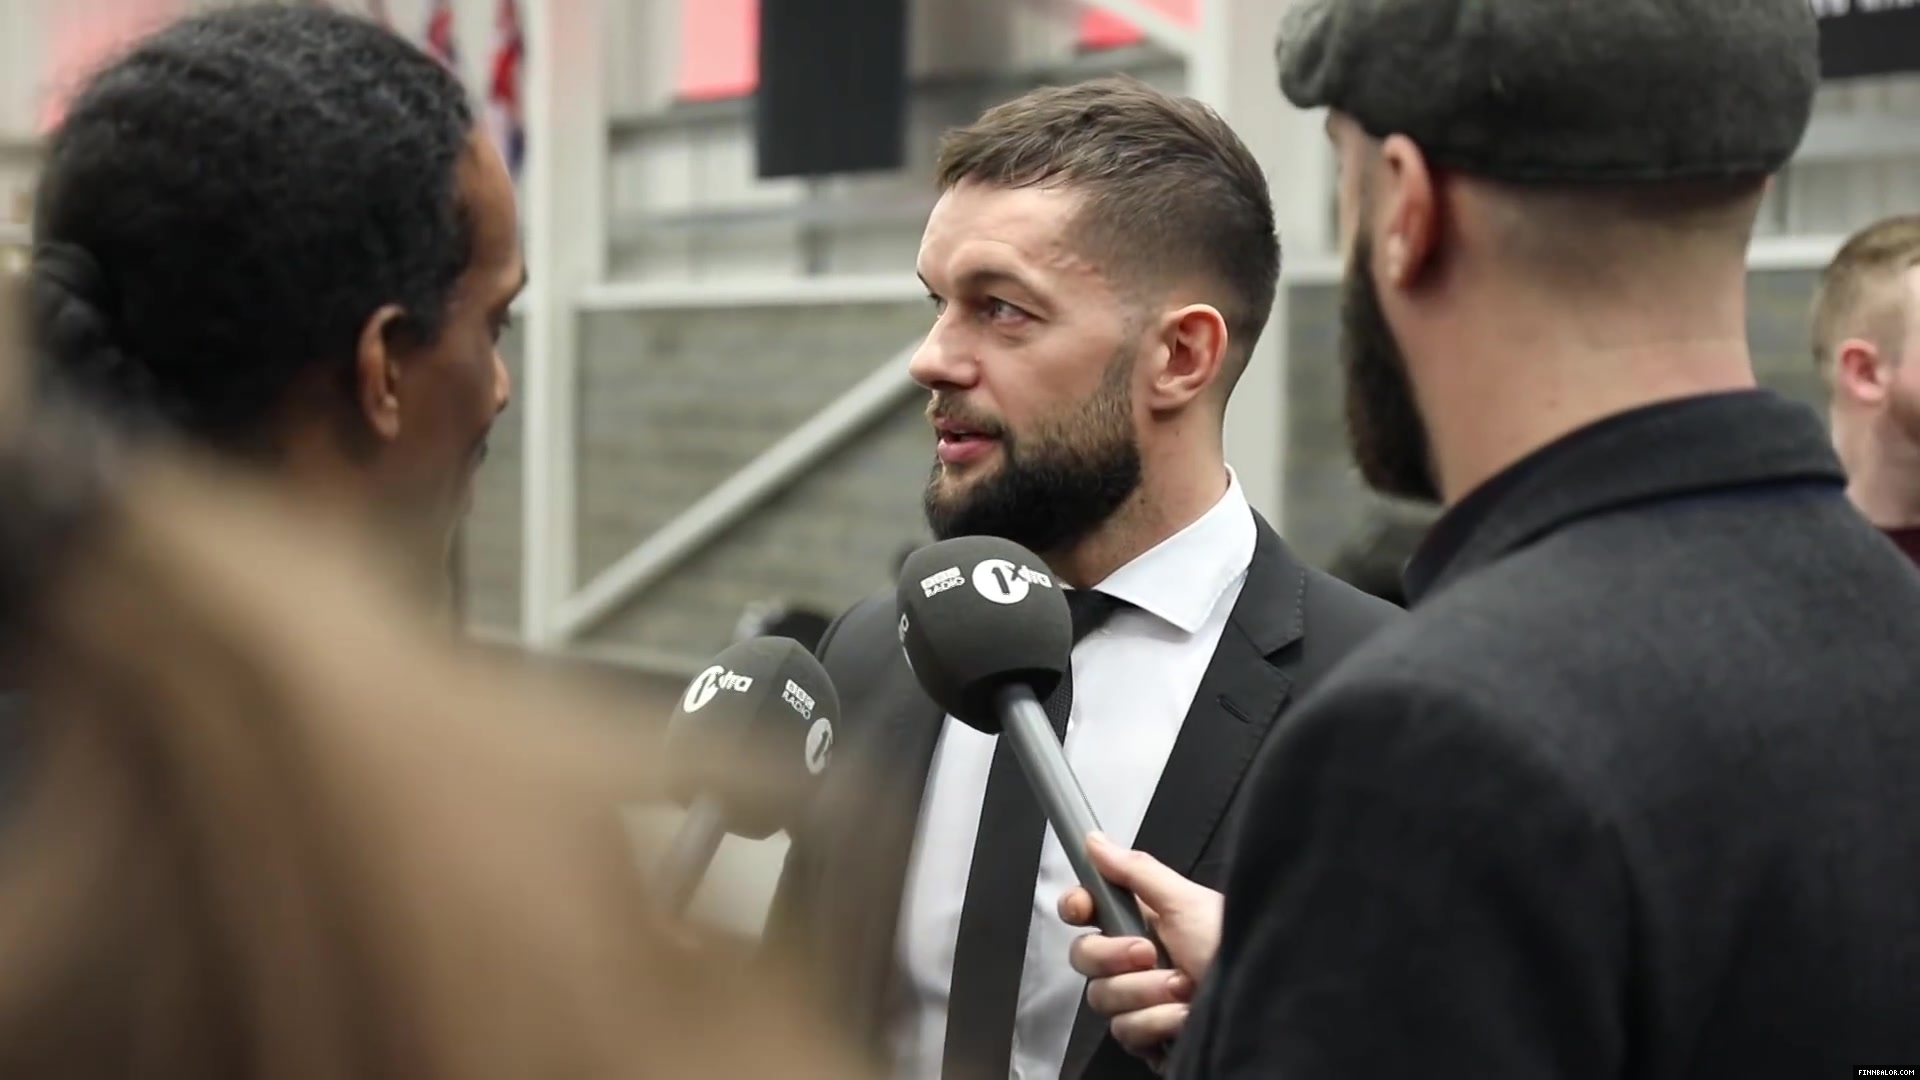 WWE_Superstar_FINN_BALOR_joins_MOUSTACHE_MOUNTAIN_at_the_opening_of_the_NXT_UK_PC_022.jpg